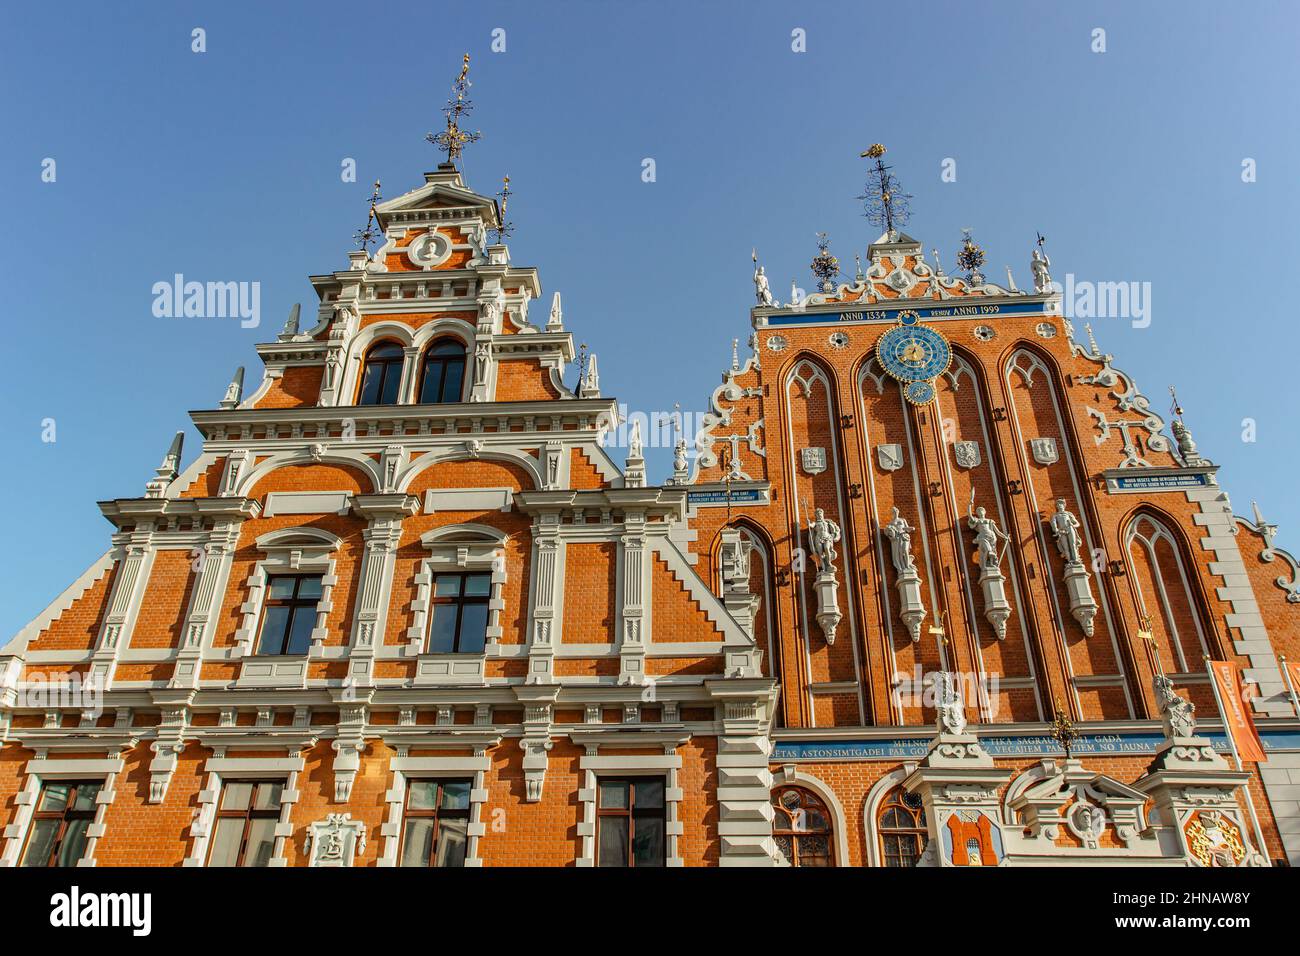 Riga,Latvia-August 15,2019.House of the Blackheads,landmark of Town Hall Square.Opulent medieval building with Dutch Renaissance facade,painted Stock Photo